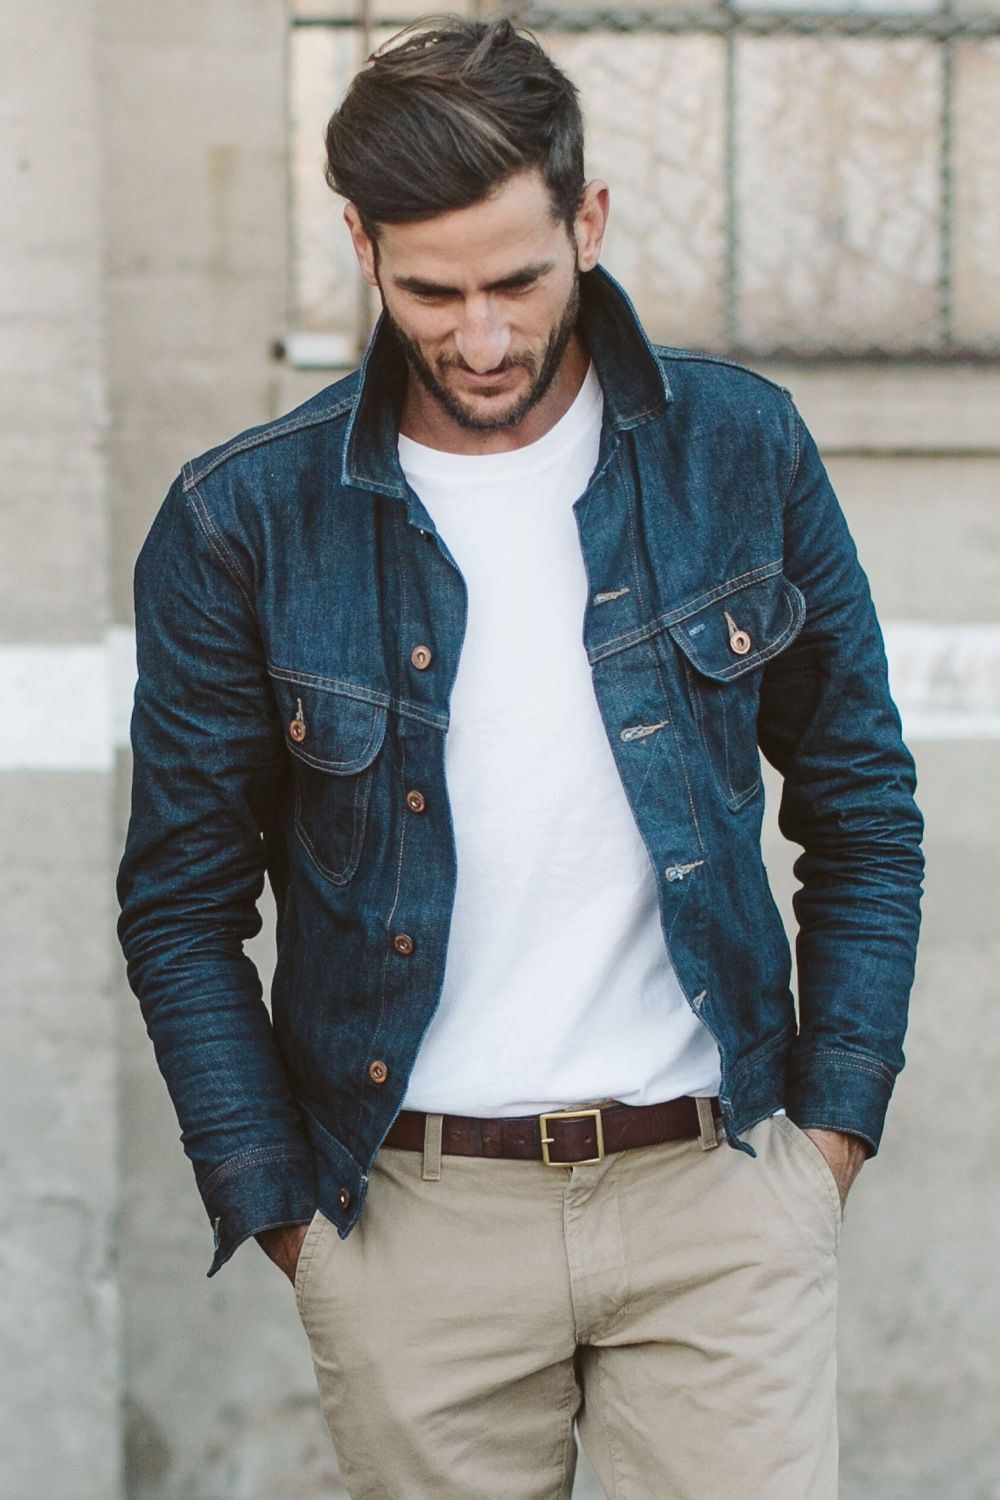 Get the stylish and elegant looks with
jean jacket for men